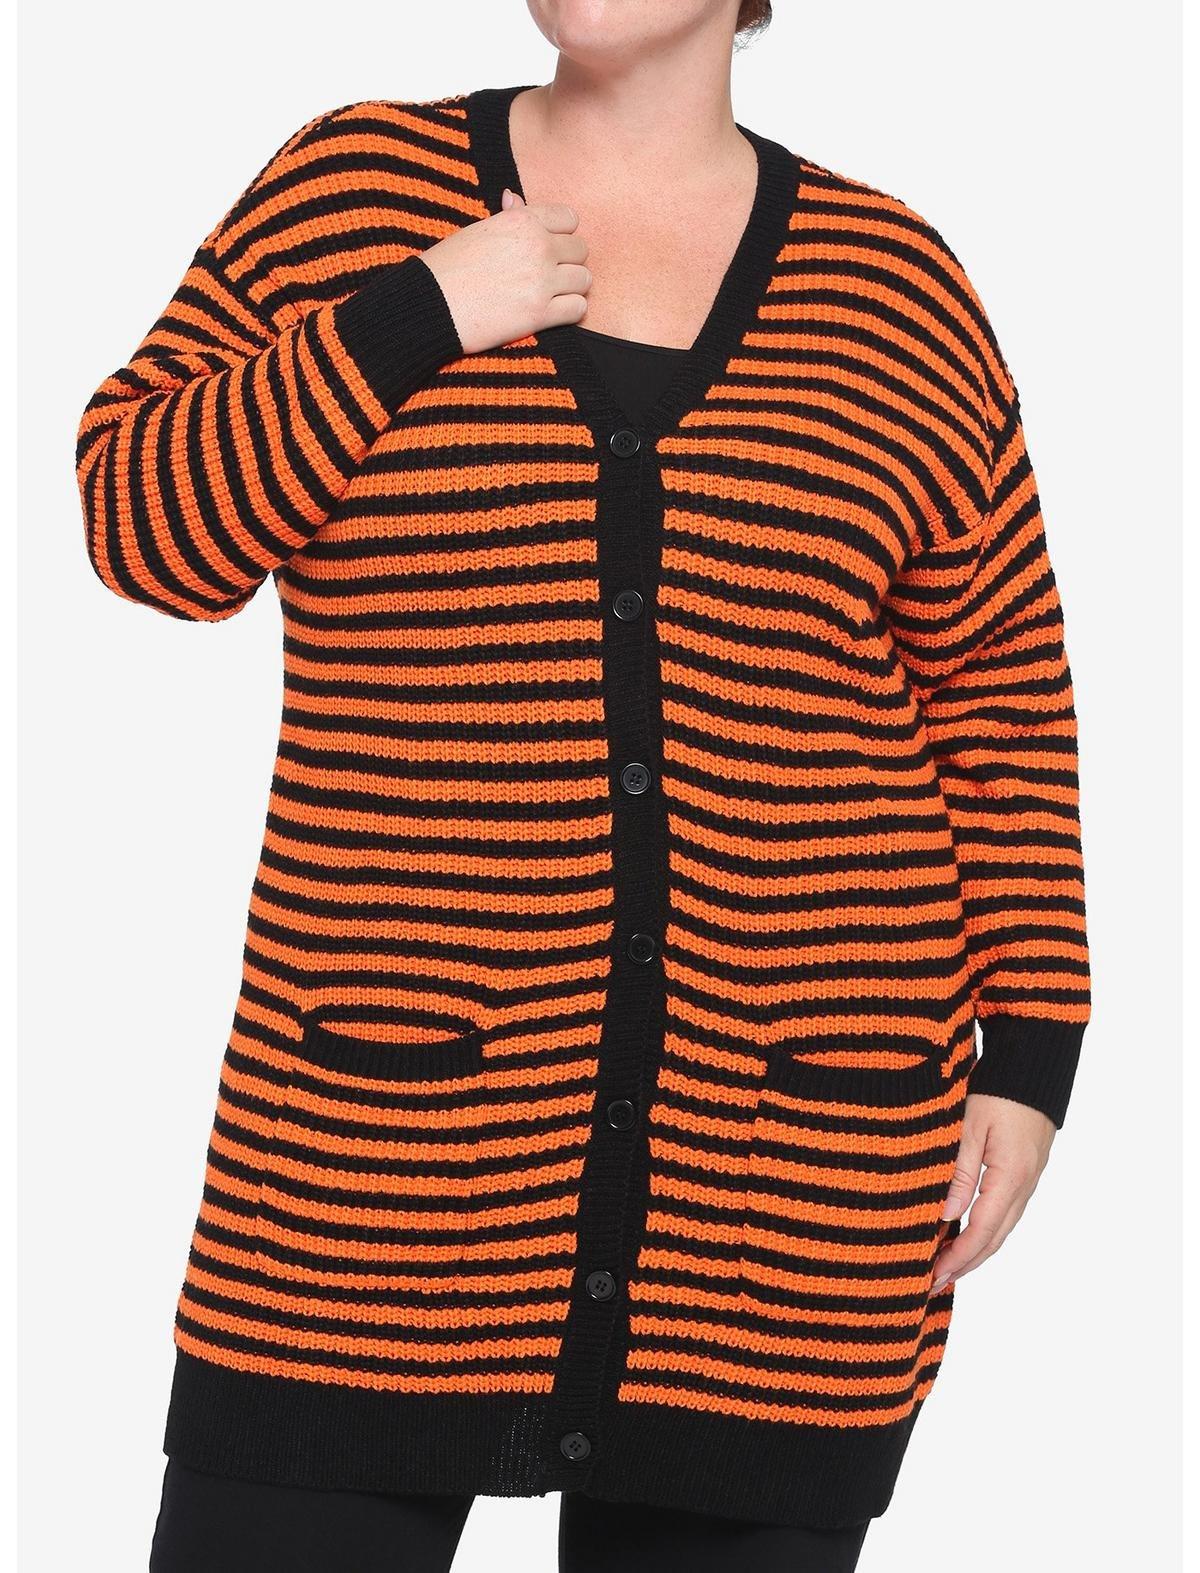 Don't miss out on the exclusive Store Orange & Black Stripe Oversized Girls  Cardigan Plus Size , designed with uniqueness